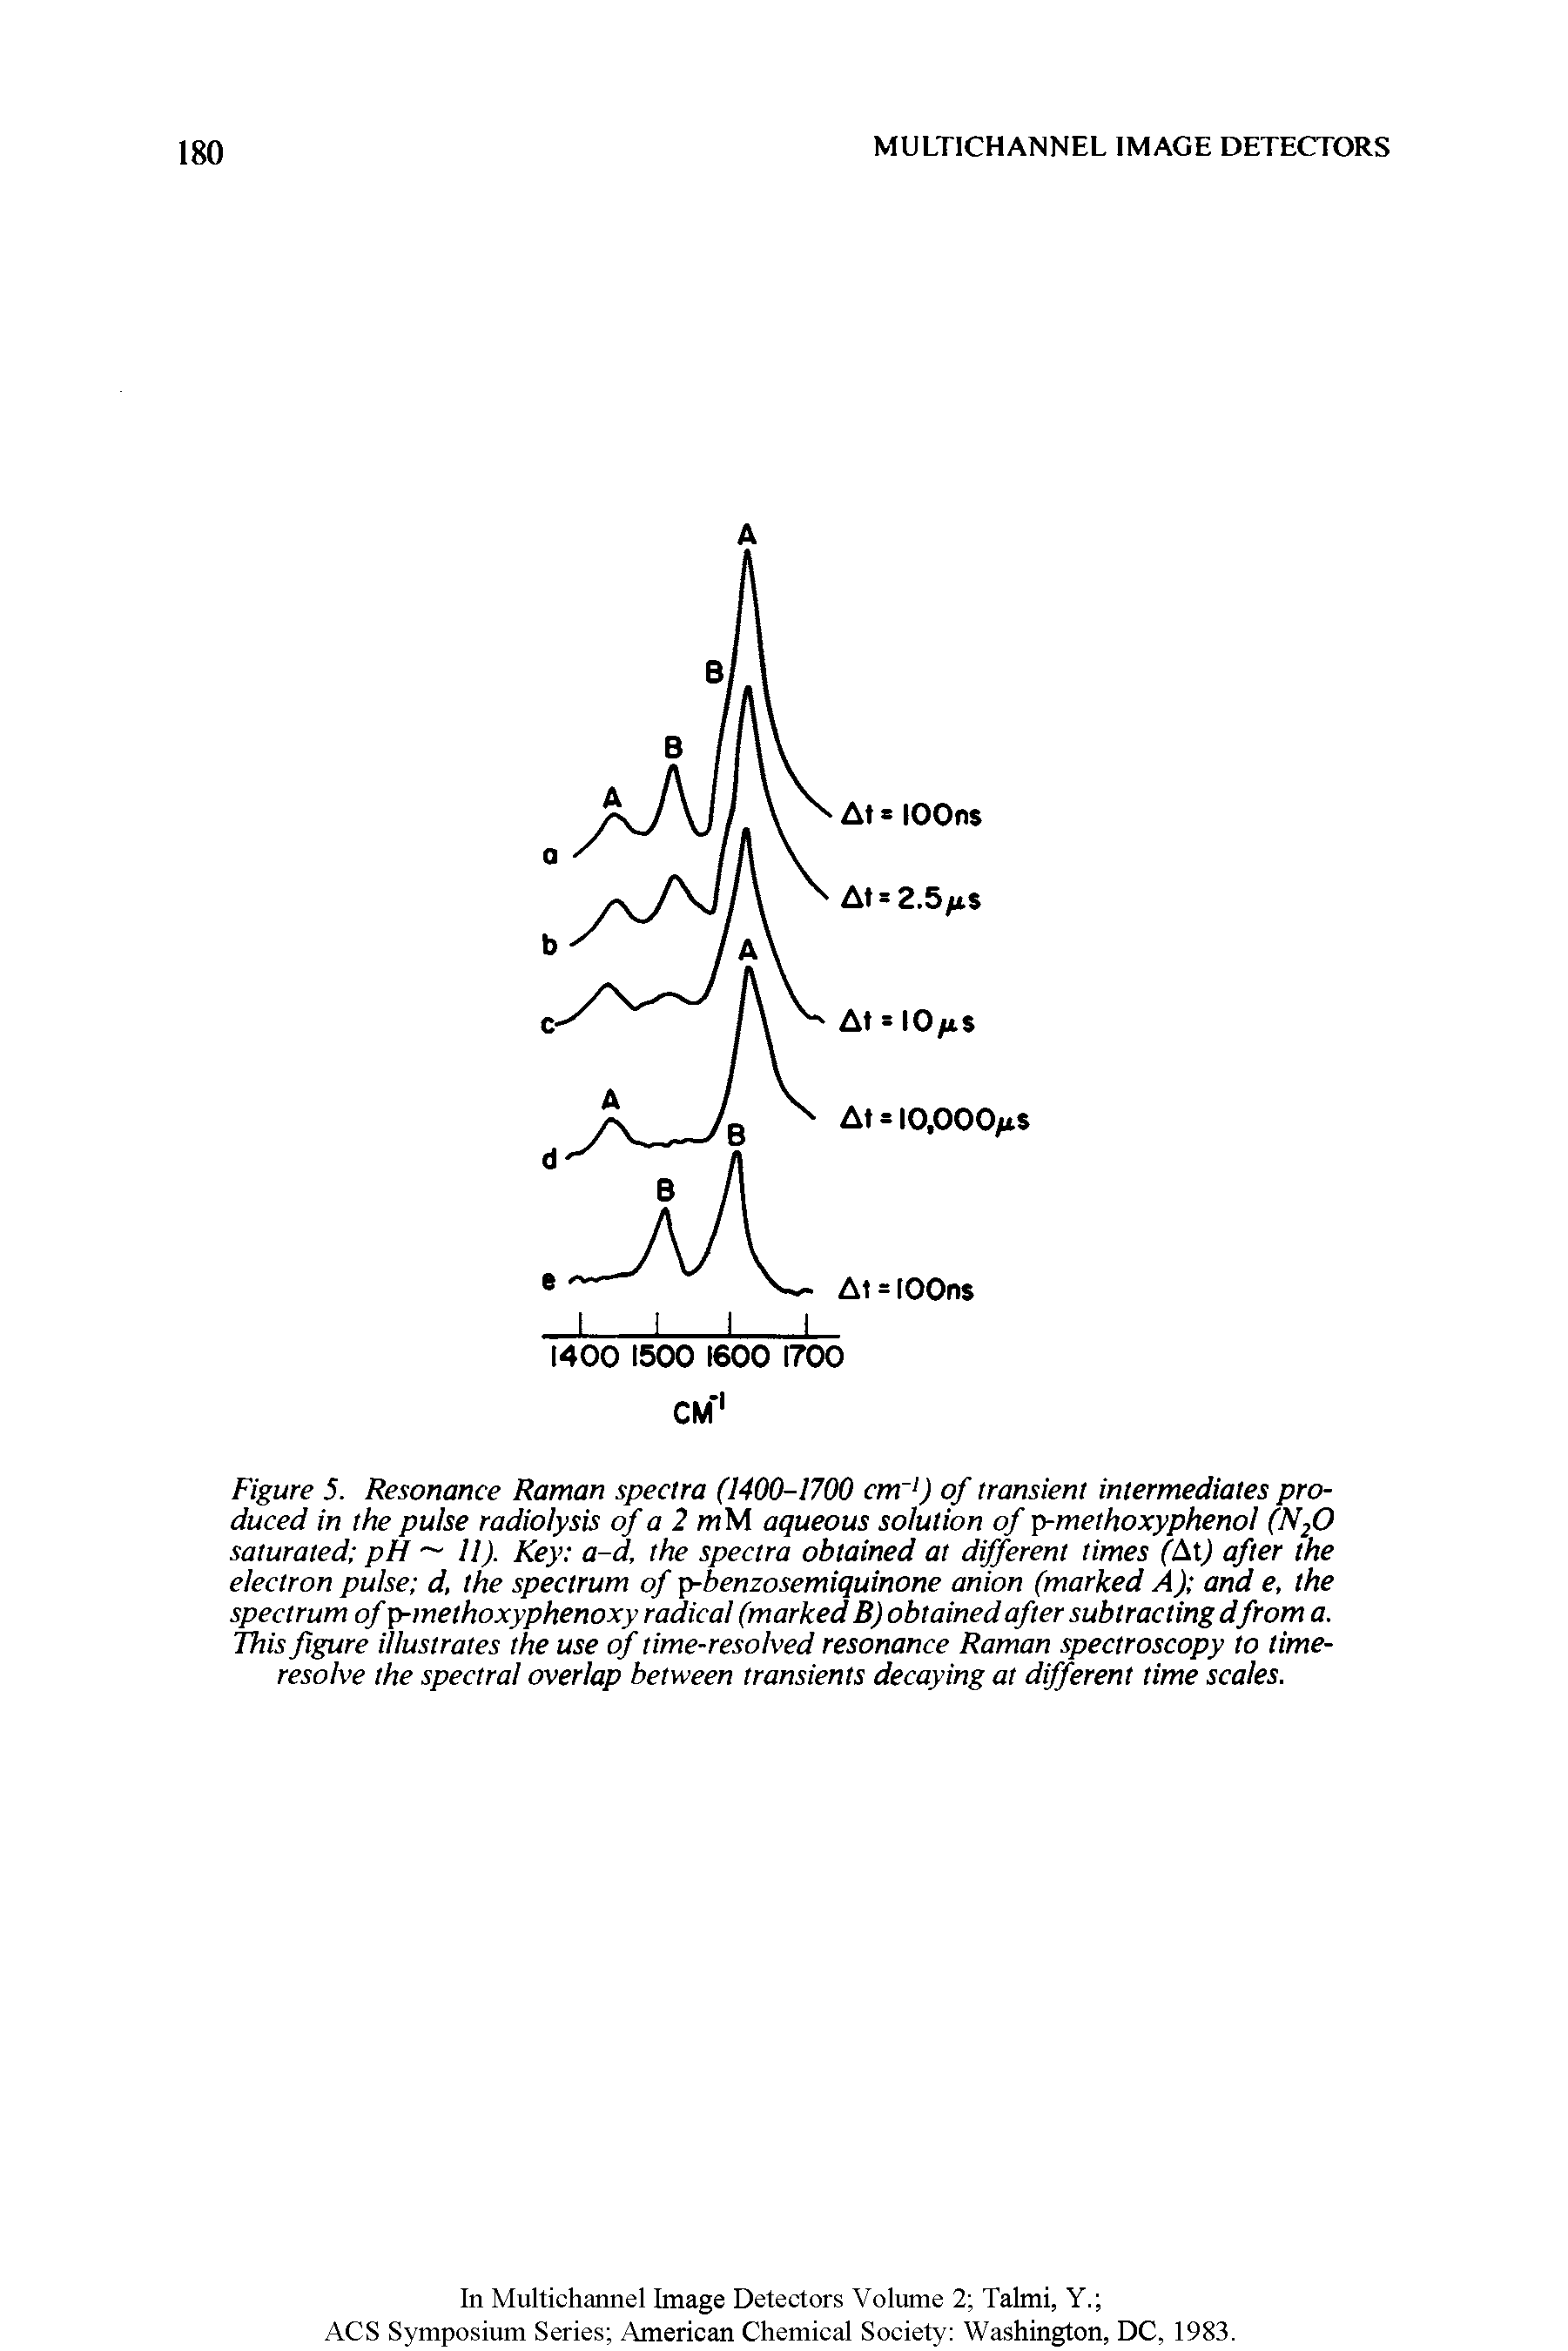 Figure 5. Resonance Raman spectra (1400-1700 cm ) of transient intermediates produced in the pulse radiolysis of a 2 mM aqueous solution of p-methoxyphenol (N20 saturated pH 11). Key a-d, the spectra obtained at different times (At) after the electron pulse d, the spectrum of p-benzosemiquinone anion (marked A) and e, the spectrum of tp-methoxyphenoxy radical (marked B) obtained after subtracting dfrom a. This figure illustrates the use of time-resolved resonance Raman spectroscopy to time-resolve the spectral overlap between transients decaying at different time scales.